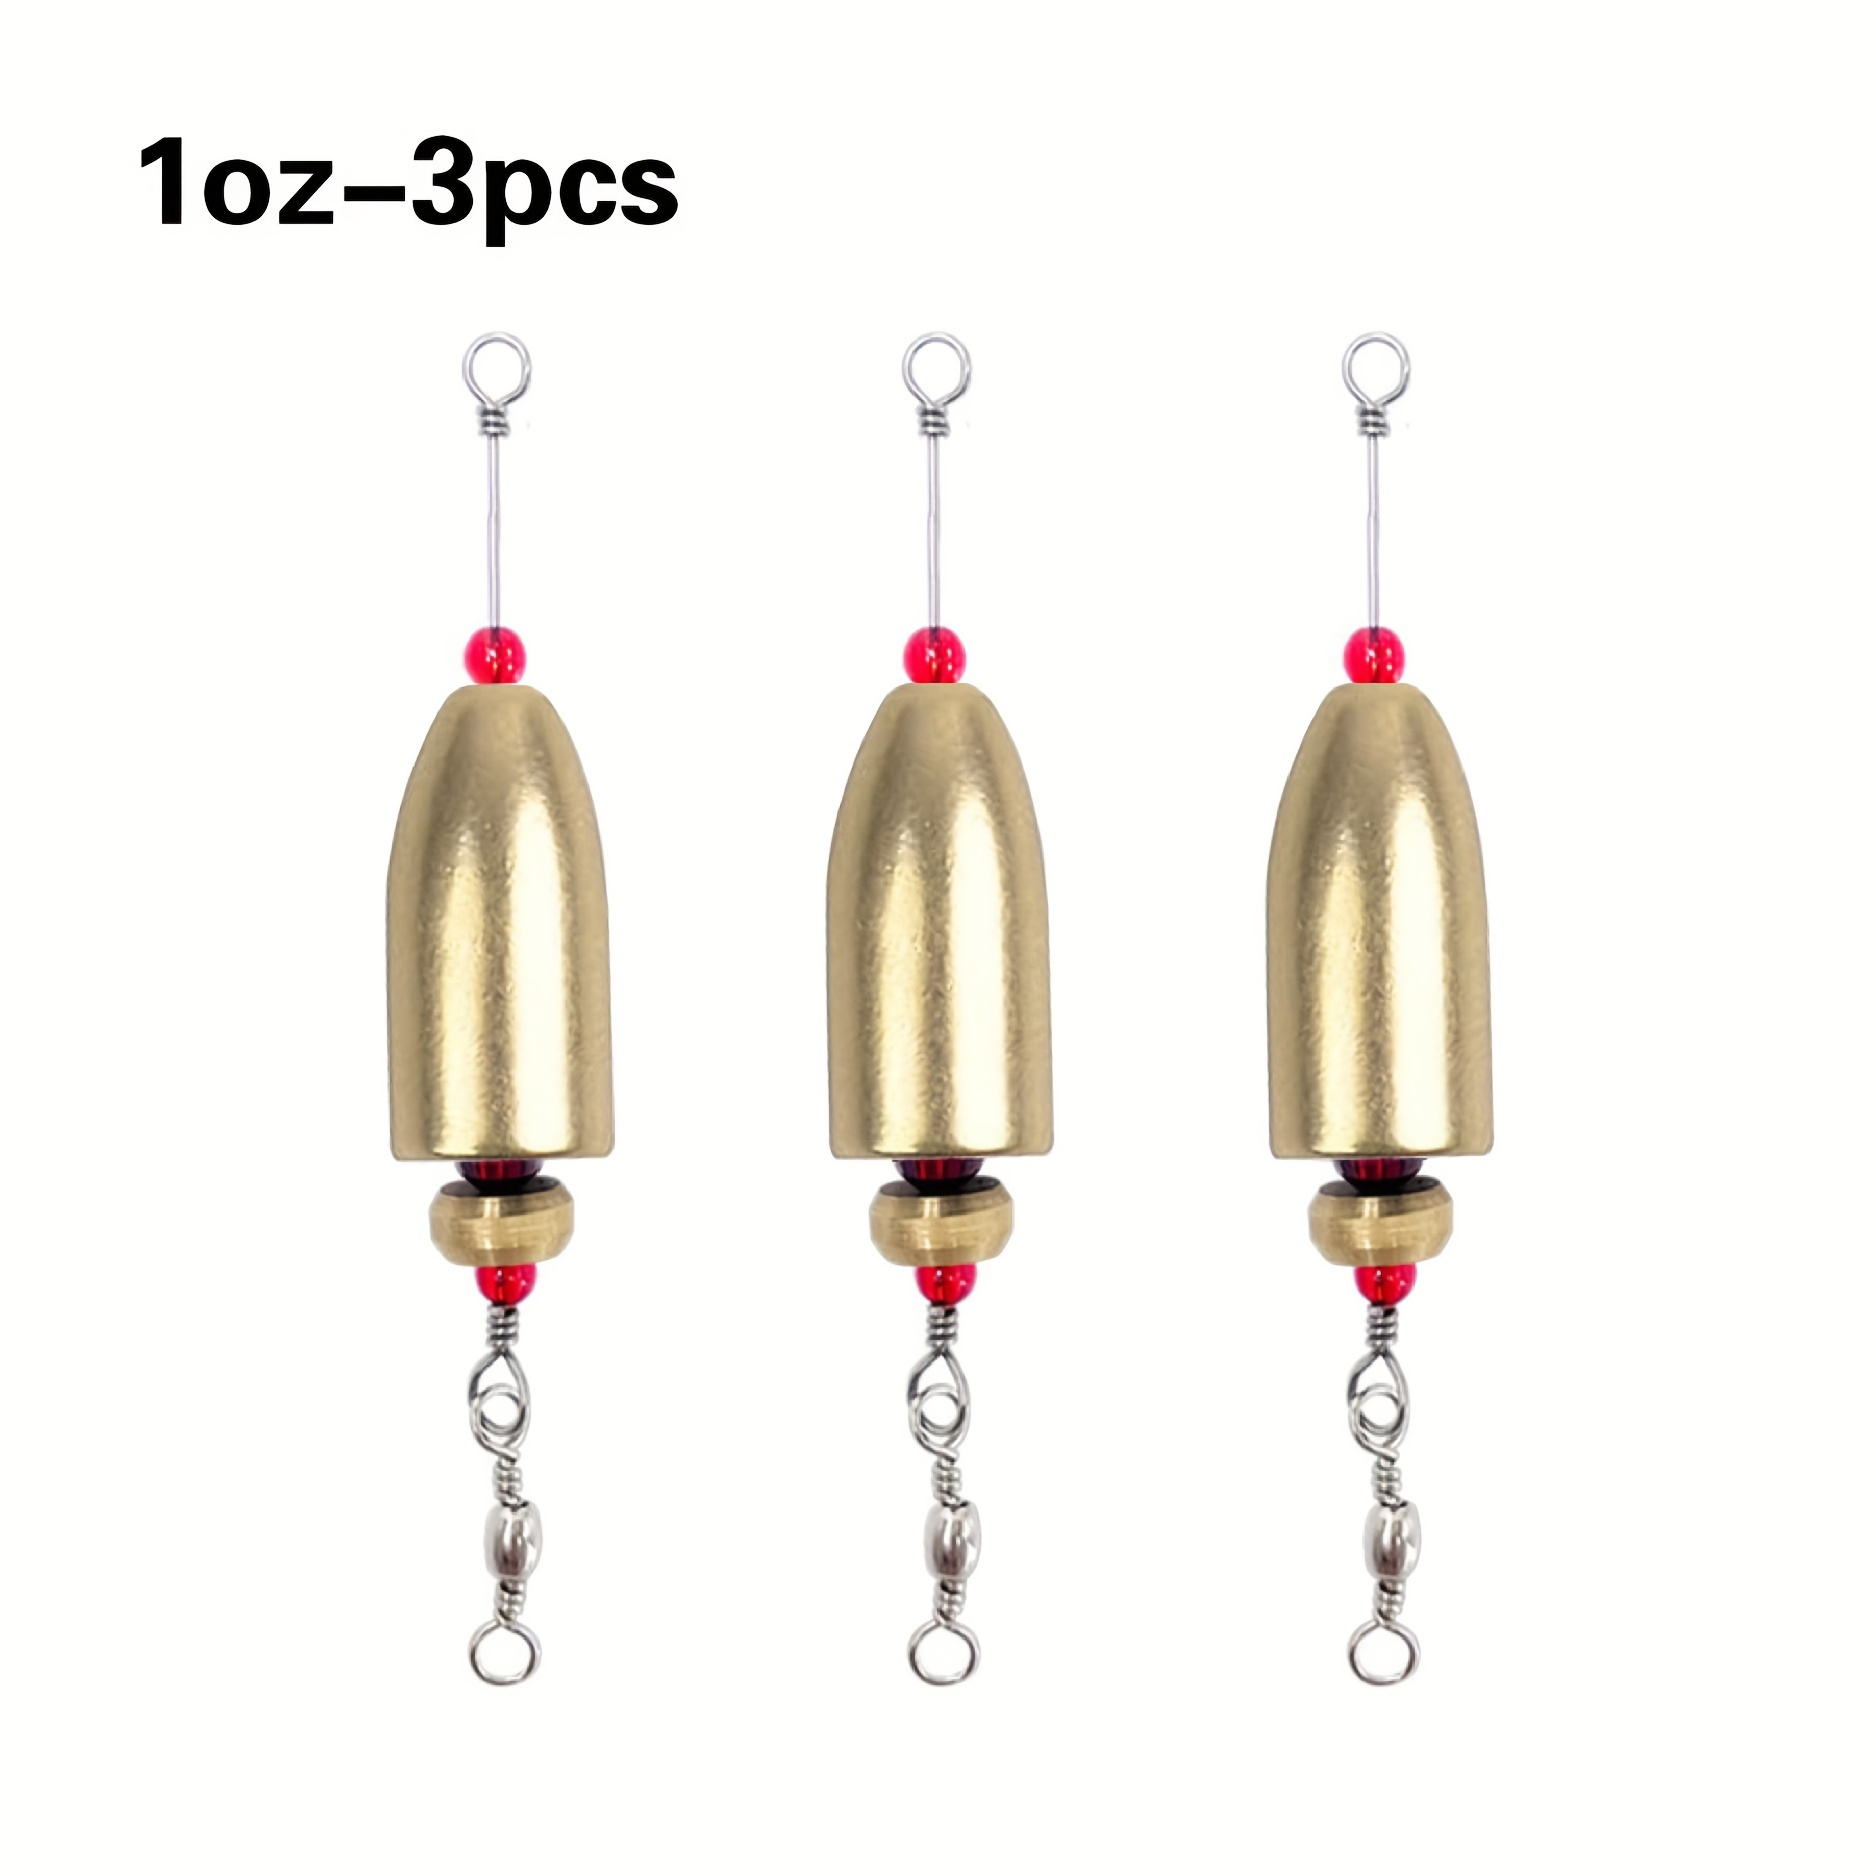 11 Packages of Top Brass Tackle Brass Weenie Fishing Weights 1/16